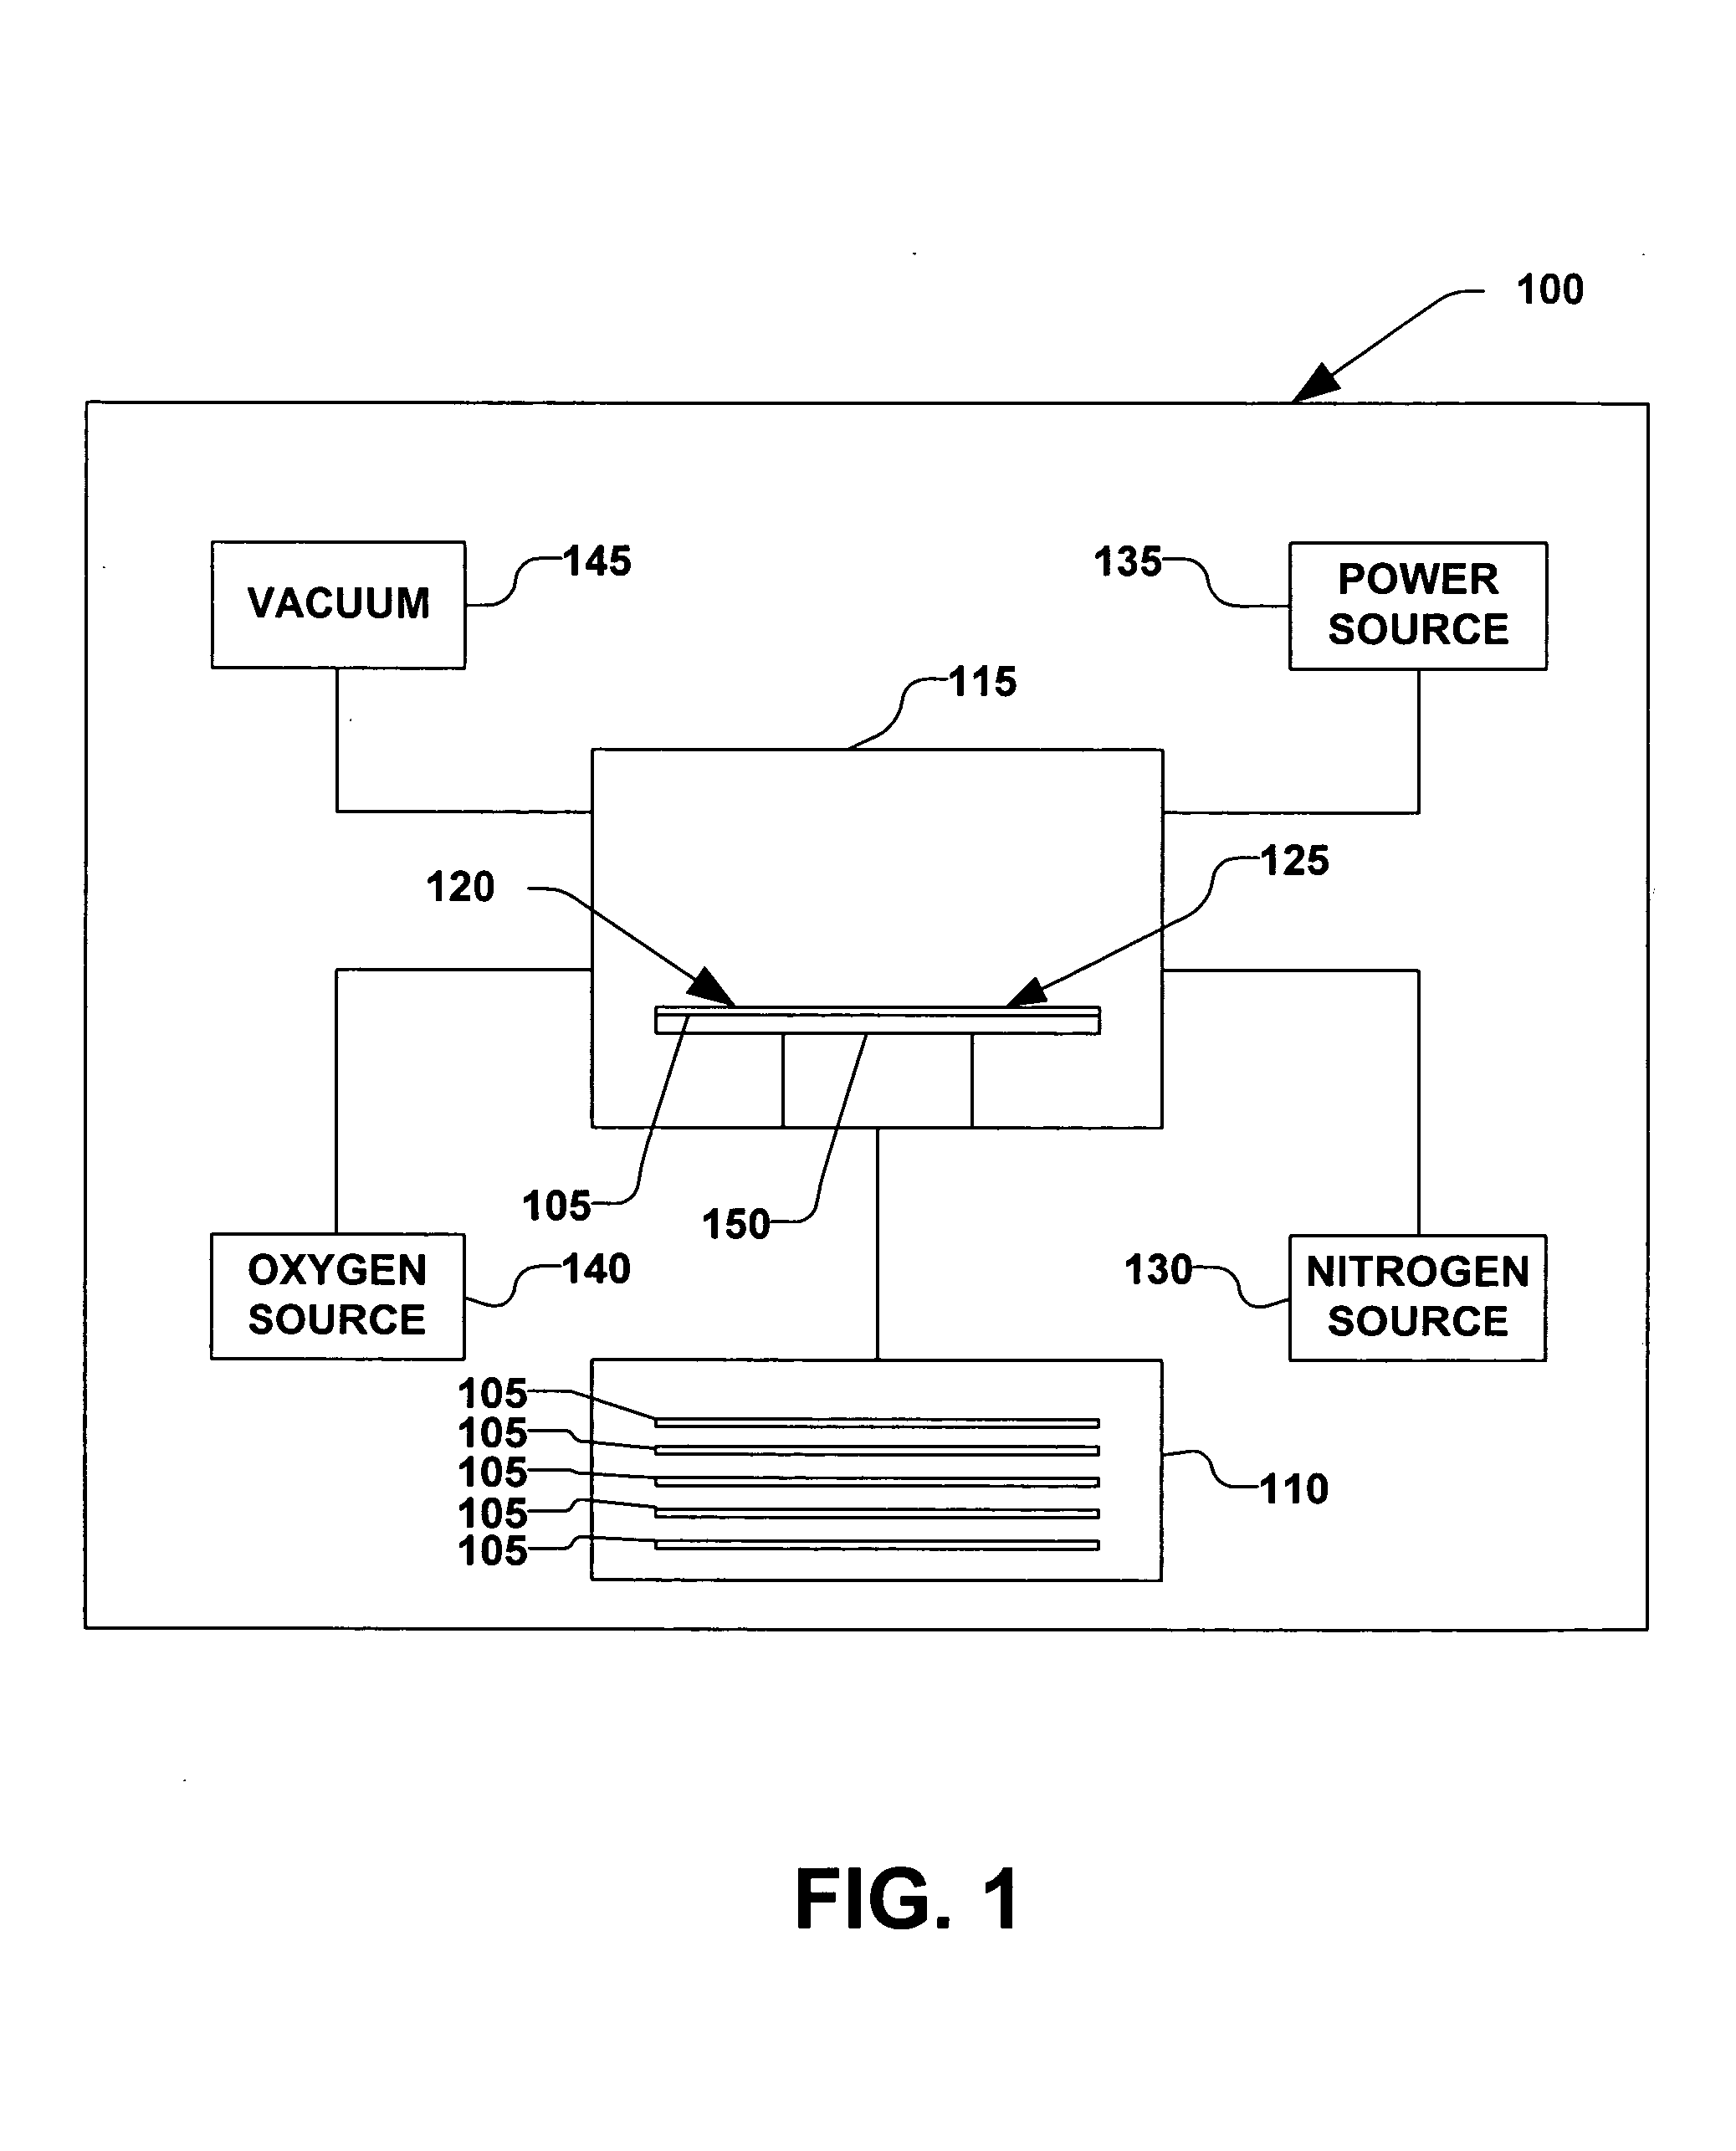 Method for removal of hydrocarbon contamination on gate oxide prior to non-thermal nitridation using "spike" radical oxidation